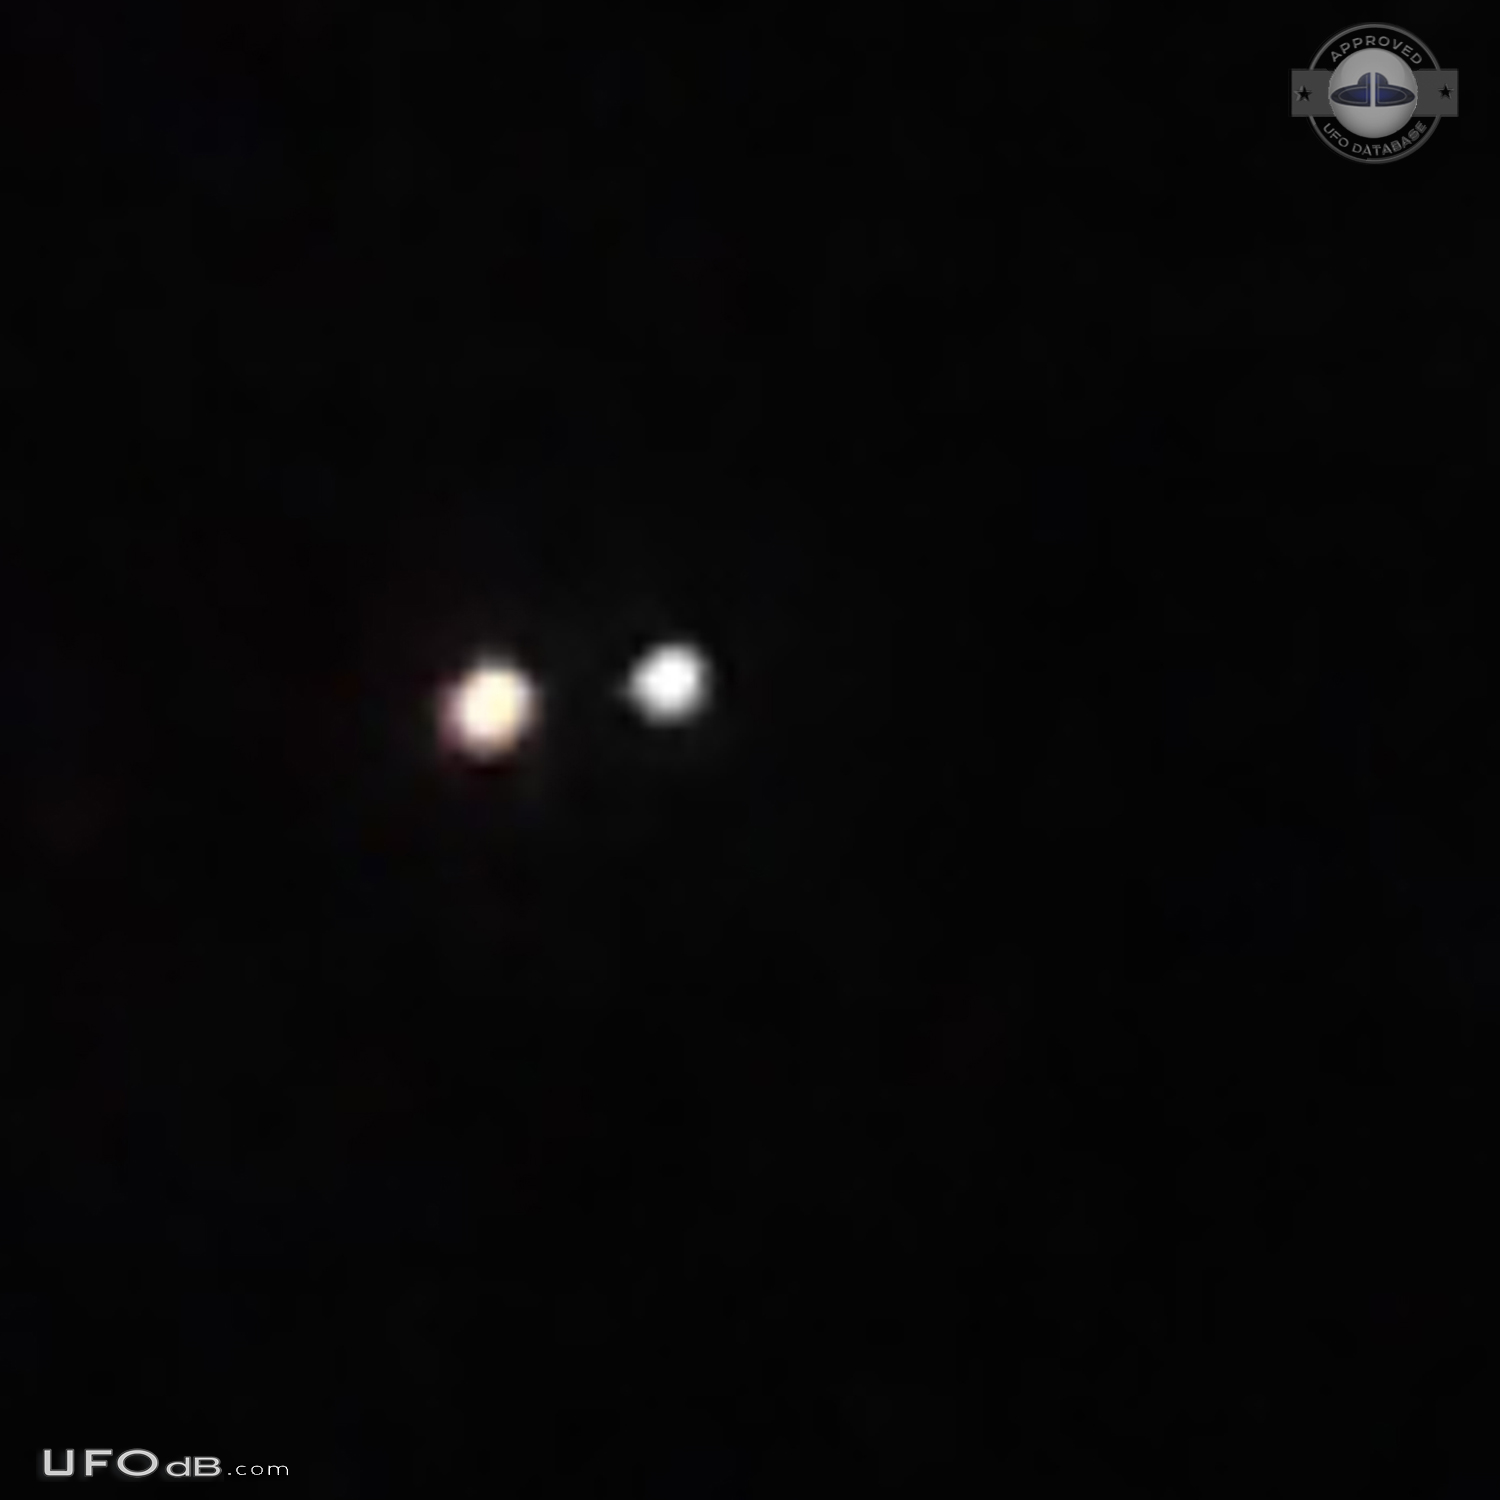 3 bright lights UFOs not too far up in the sky sitting still - Canada UFO Picture #674-1